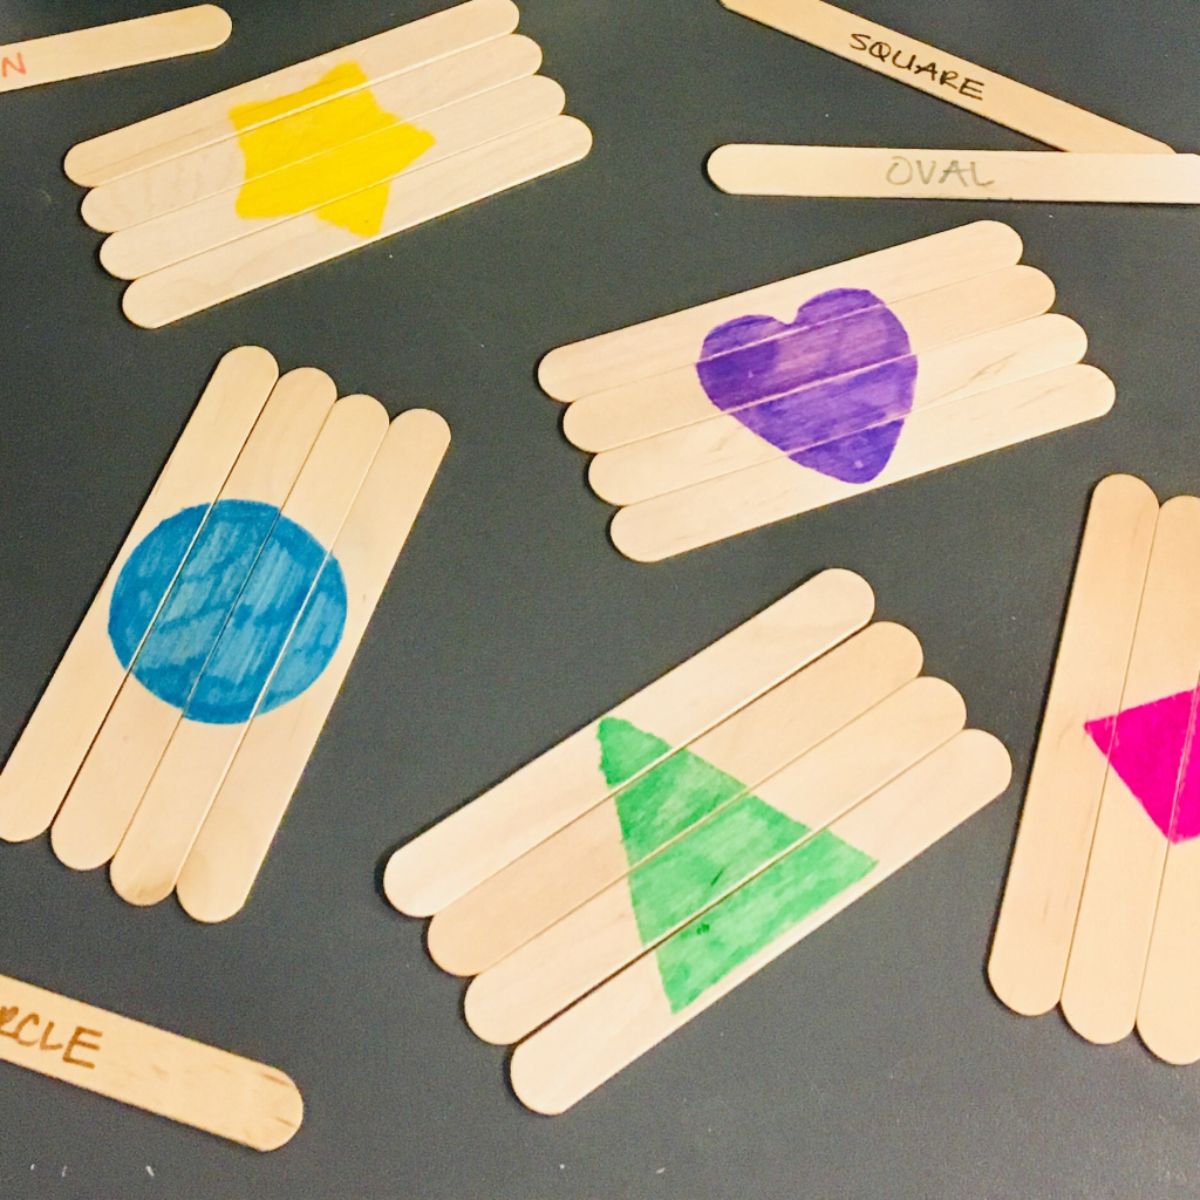 popsicle sticks have been placed together to make different shapes